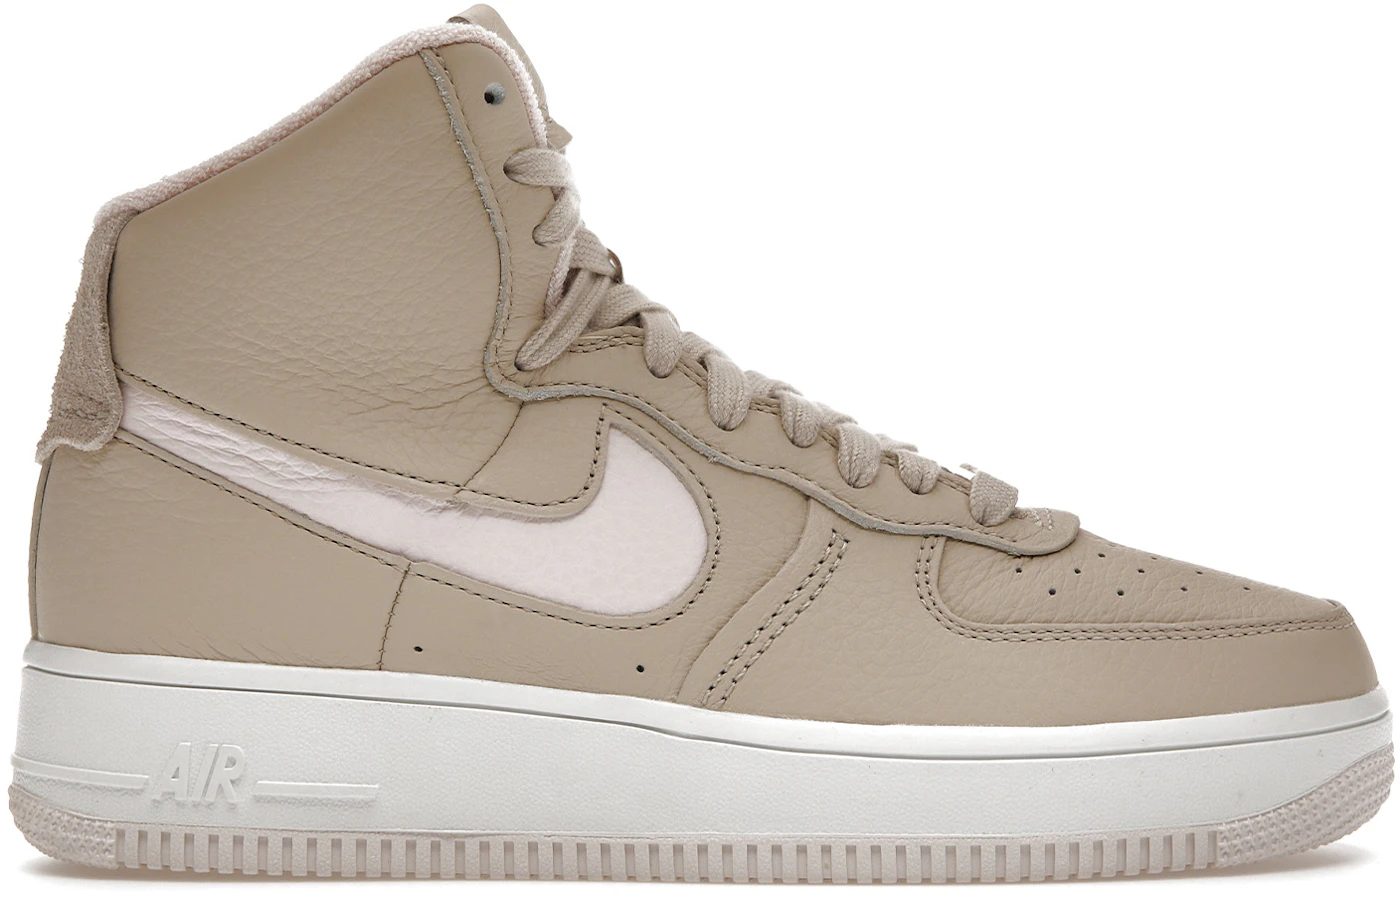 This Nike Air Force 1 High Is Stuffed With Loads Of Cool Details - Sneaker  News